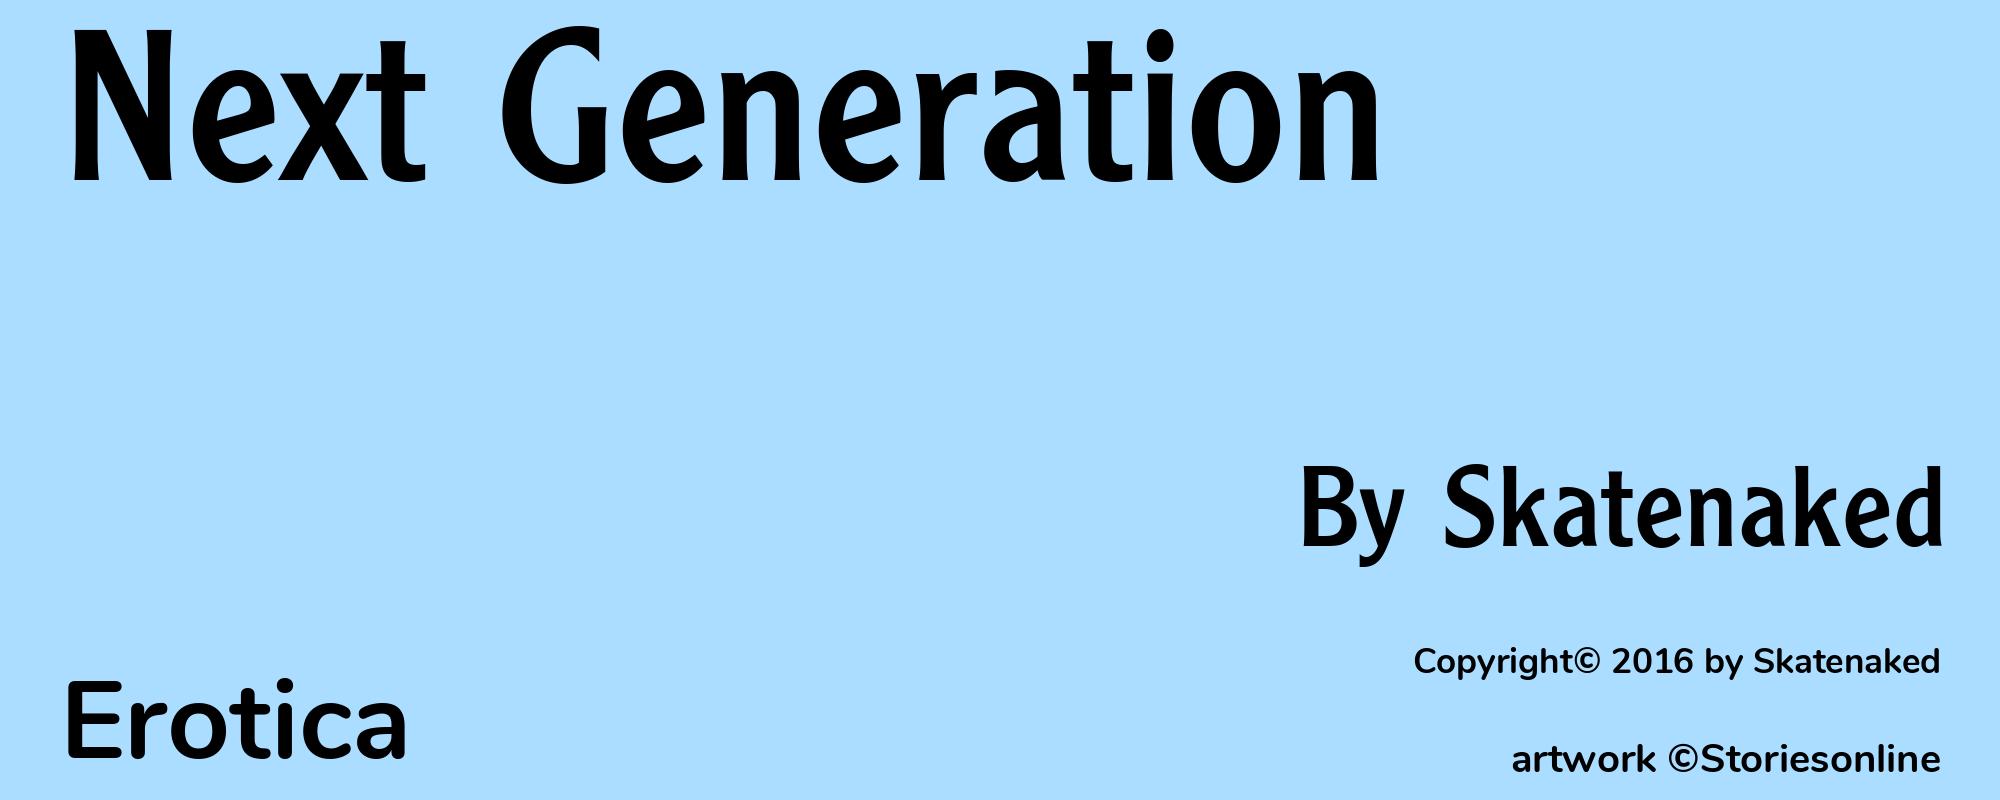 Next Generation - Cover